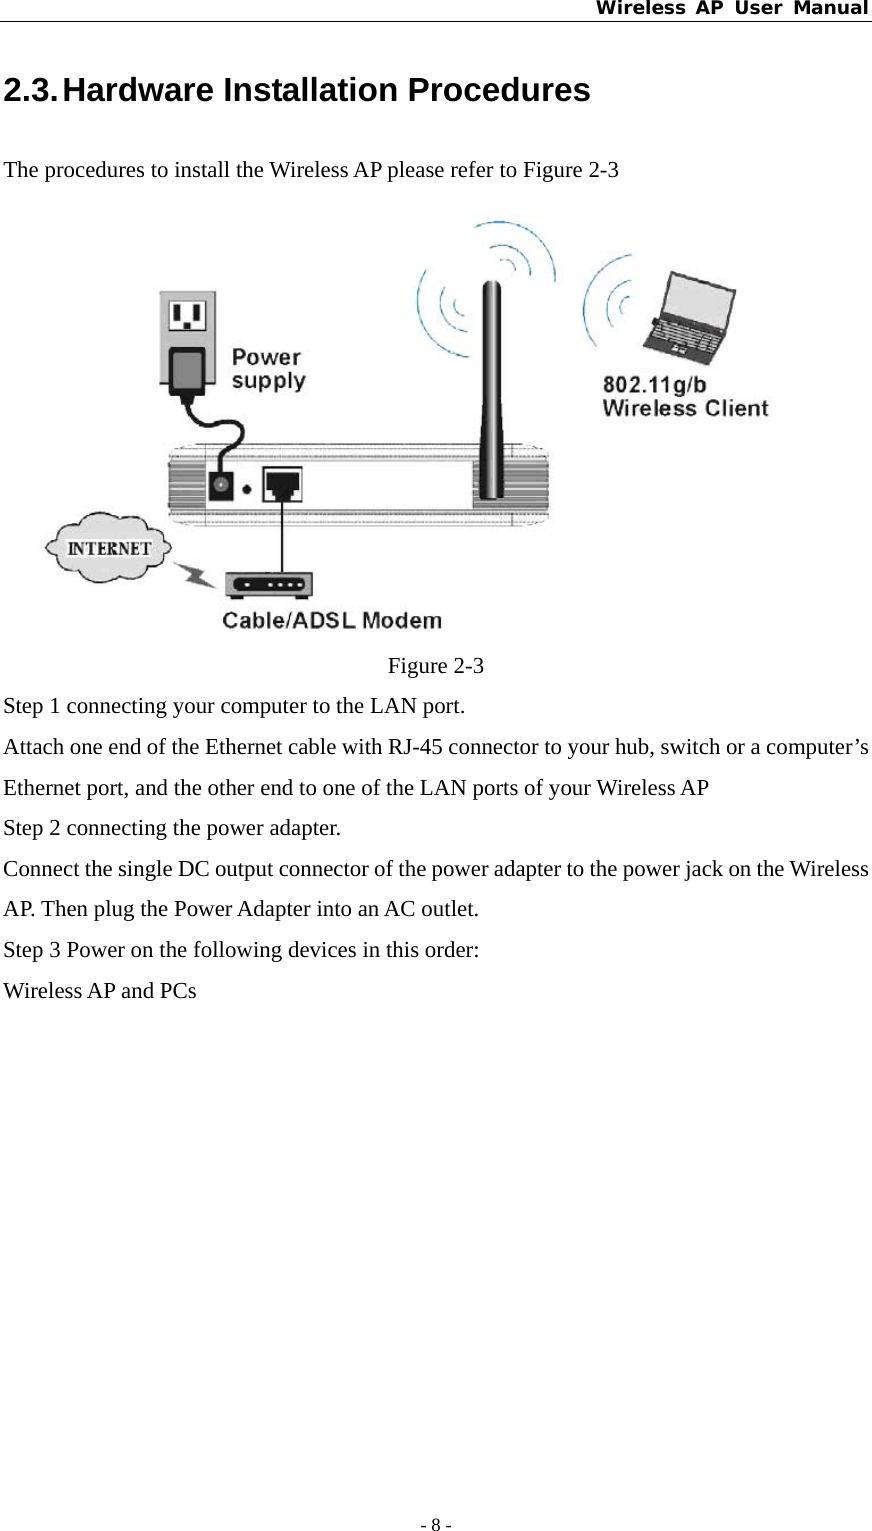 Wireless AP User Manual - 8 -  2.3. Hardware Installation Procedures The procedures to install the Wireless AP please refer to Figure 2-3  Figure 2-3 Step 1 connecting your computer to the LAN port. Attach one end of the Ethernet cable with RJ-45 connector to your hub, switch or a computer’s Ethernet port, and the other end to one of the LAN ports of your Wireless AP Step 2 connecting the power adapter. Connect the single DC output connector of the power adapter to the power jack on the Wireless AP. Then plug the Power Adapter into an AC outlet. Step 3 Power on the following devices in this order: Wireless AP and PCs 